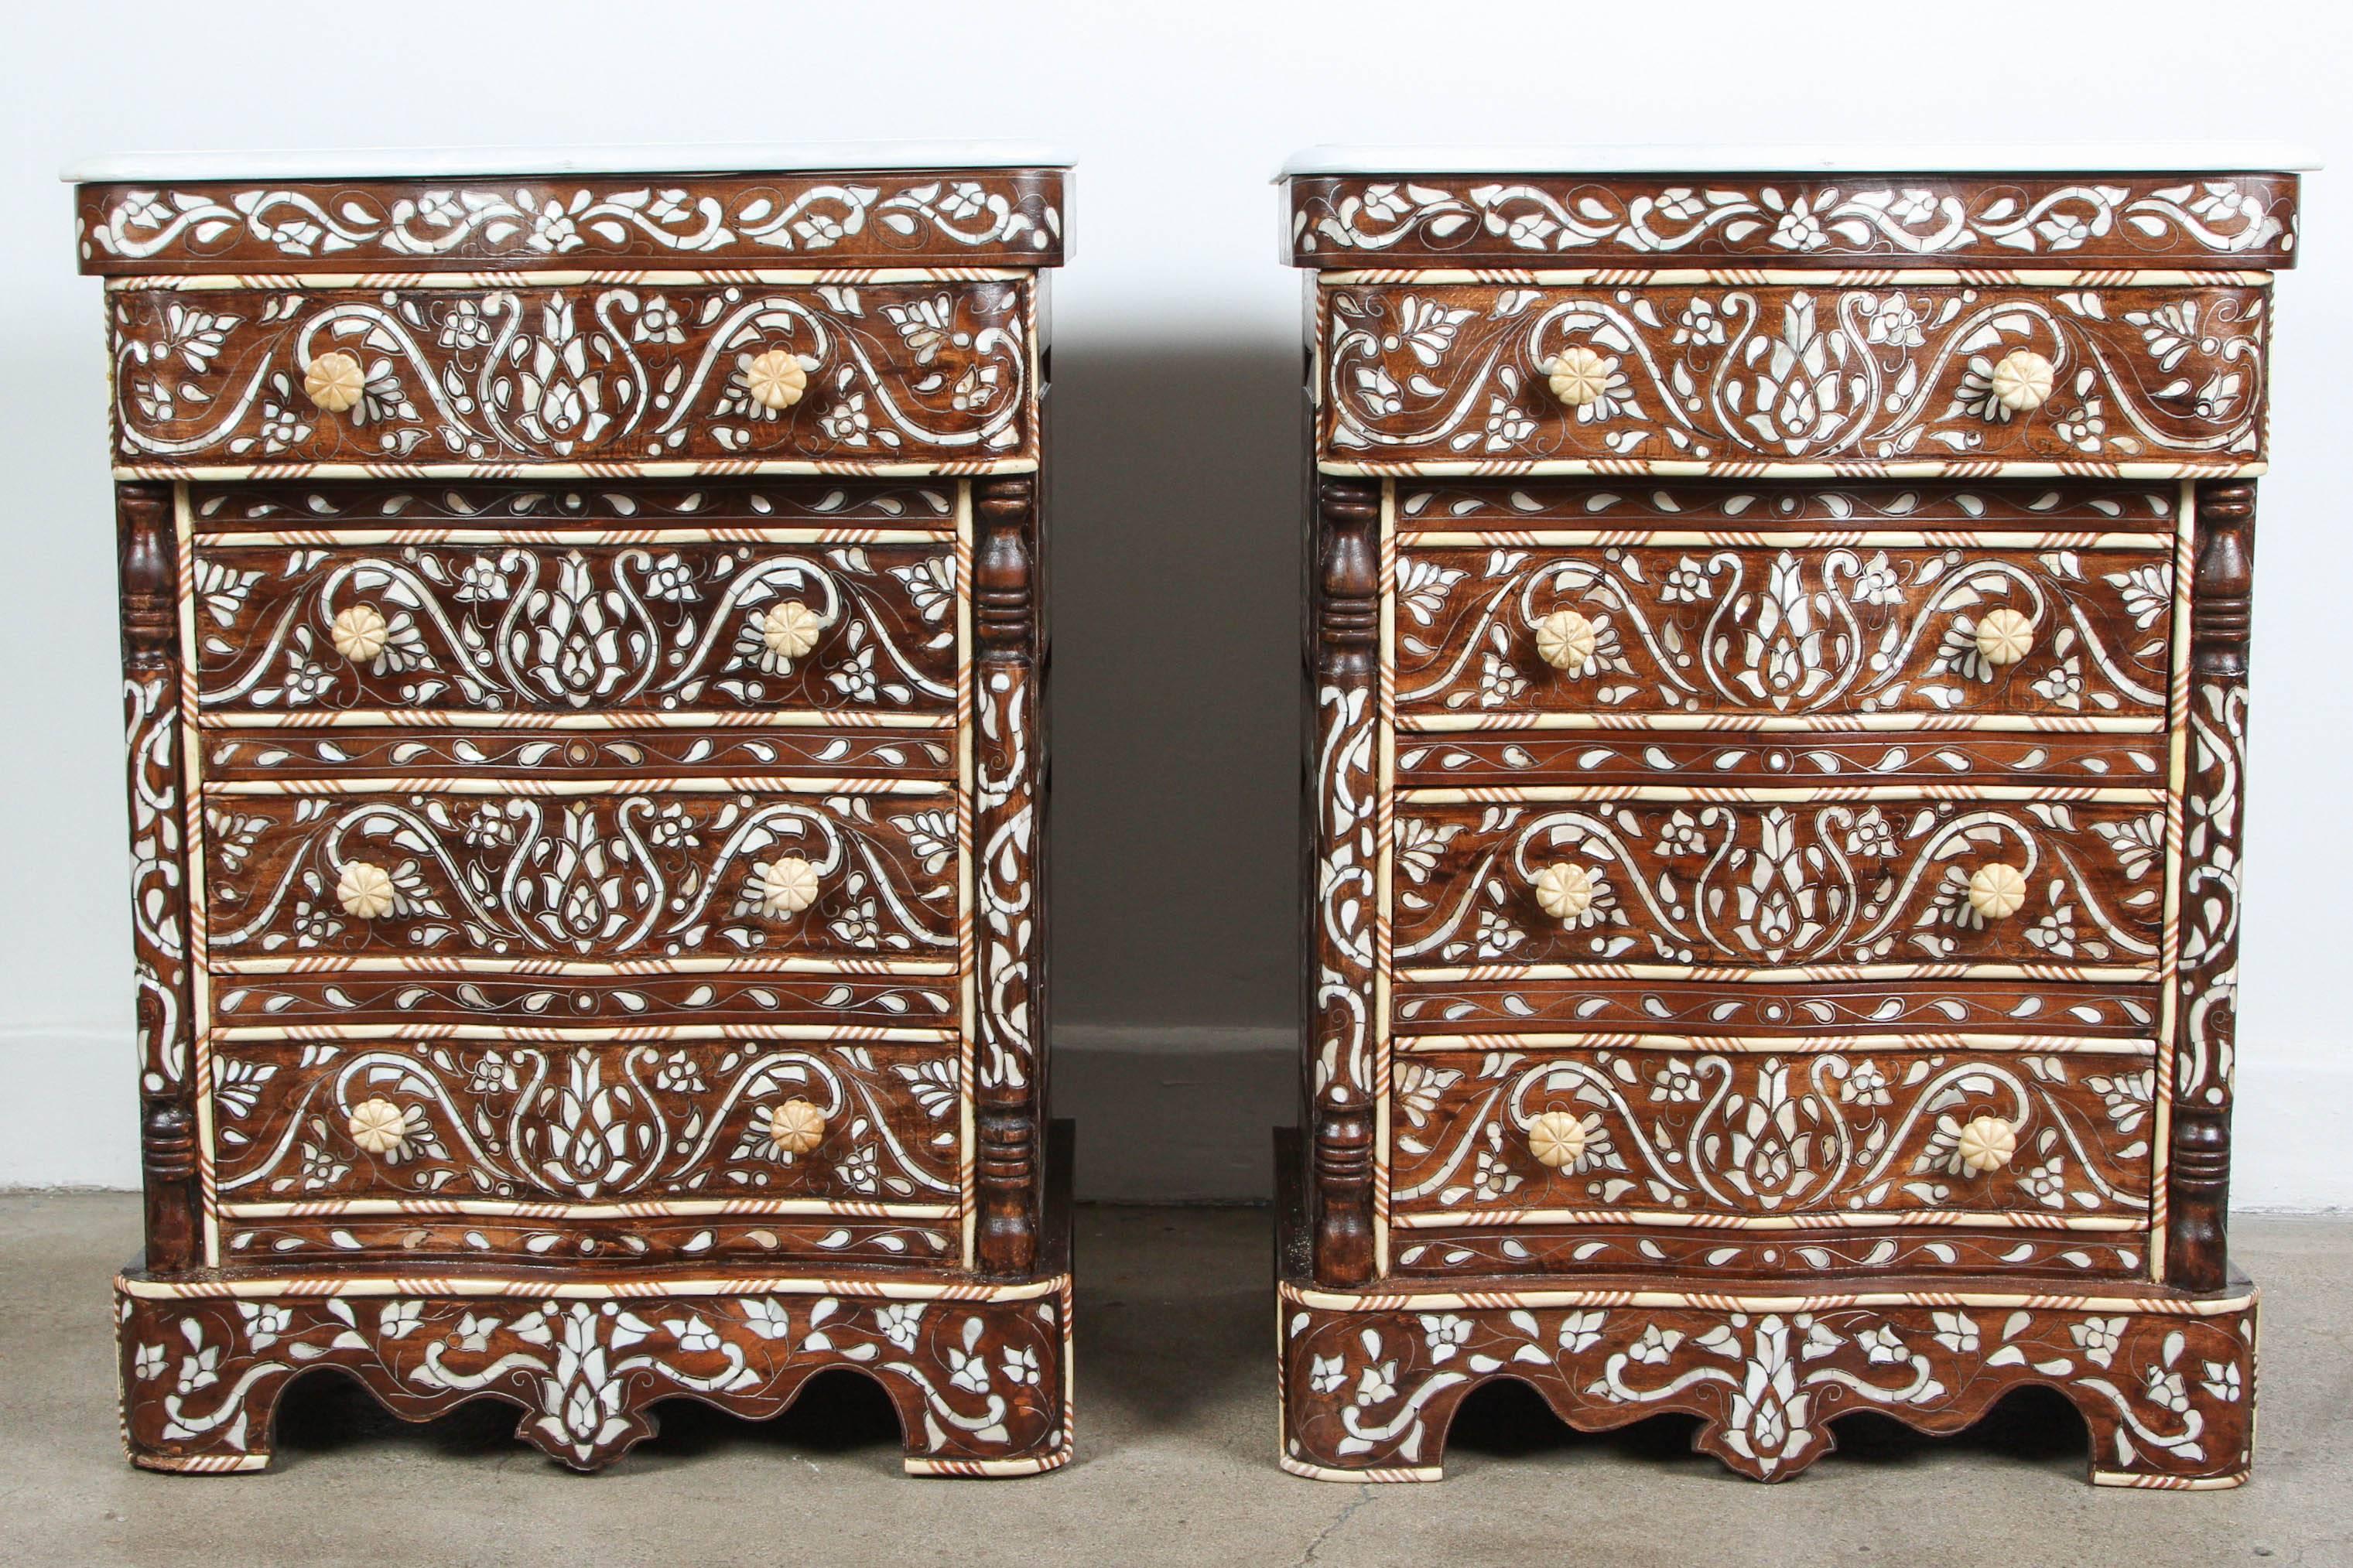 Fabulous pair of Middle Eastern Syrian mother of pearl inlay nightstands.
Handcrafted wedding dresser with four drawers, wood inlay with mother of pearl, shell and bone.
Moorish arches and intricate Islamic designs.
Dowry chest of drawers heavily